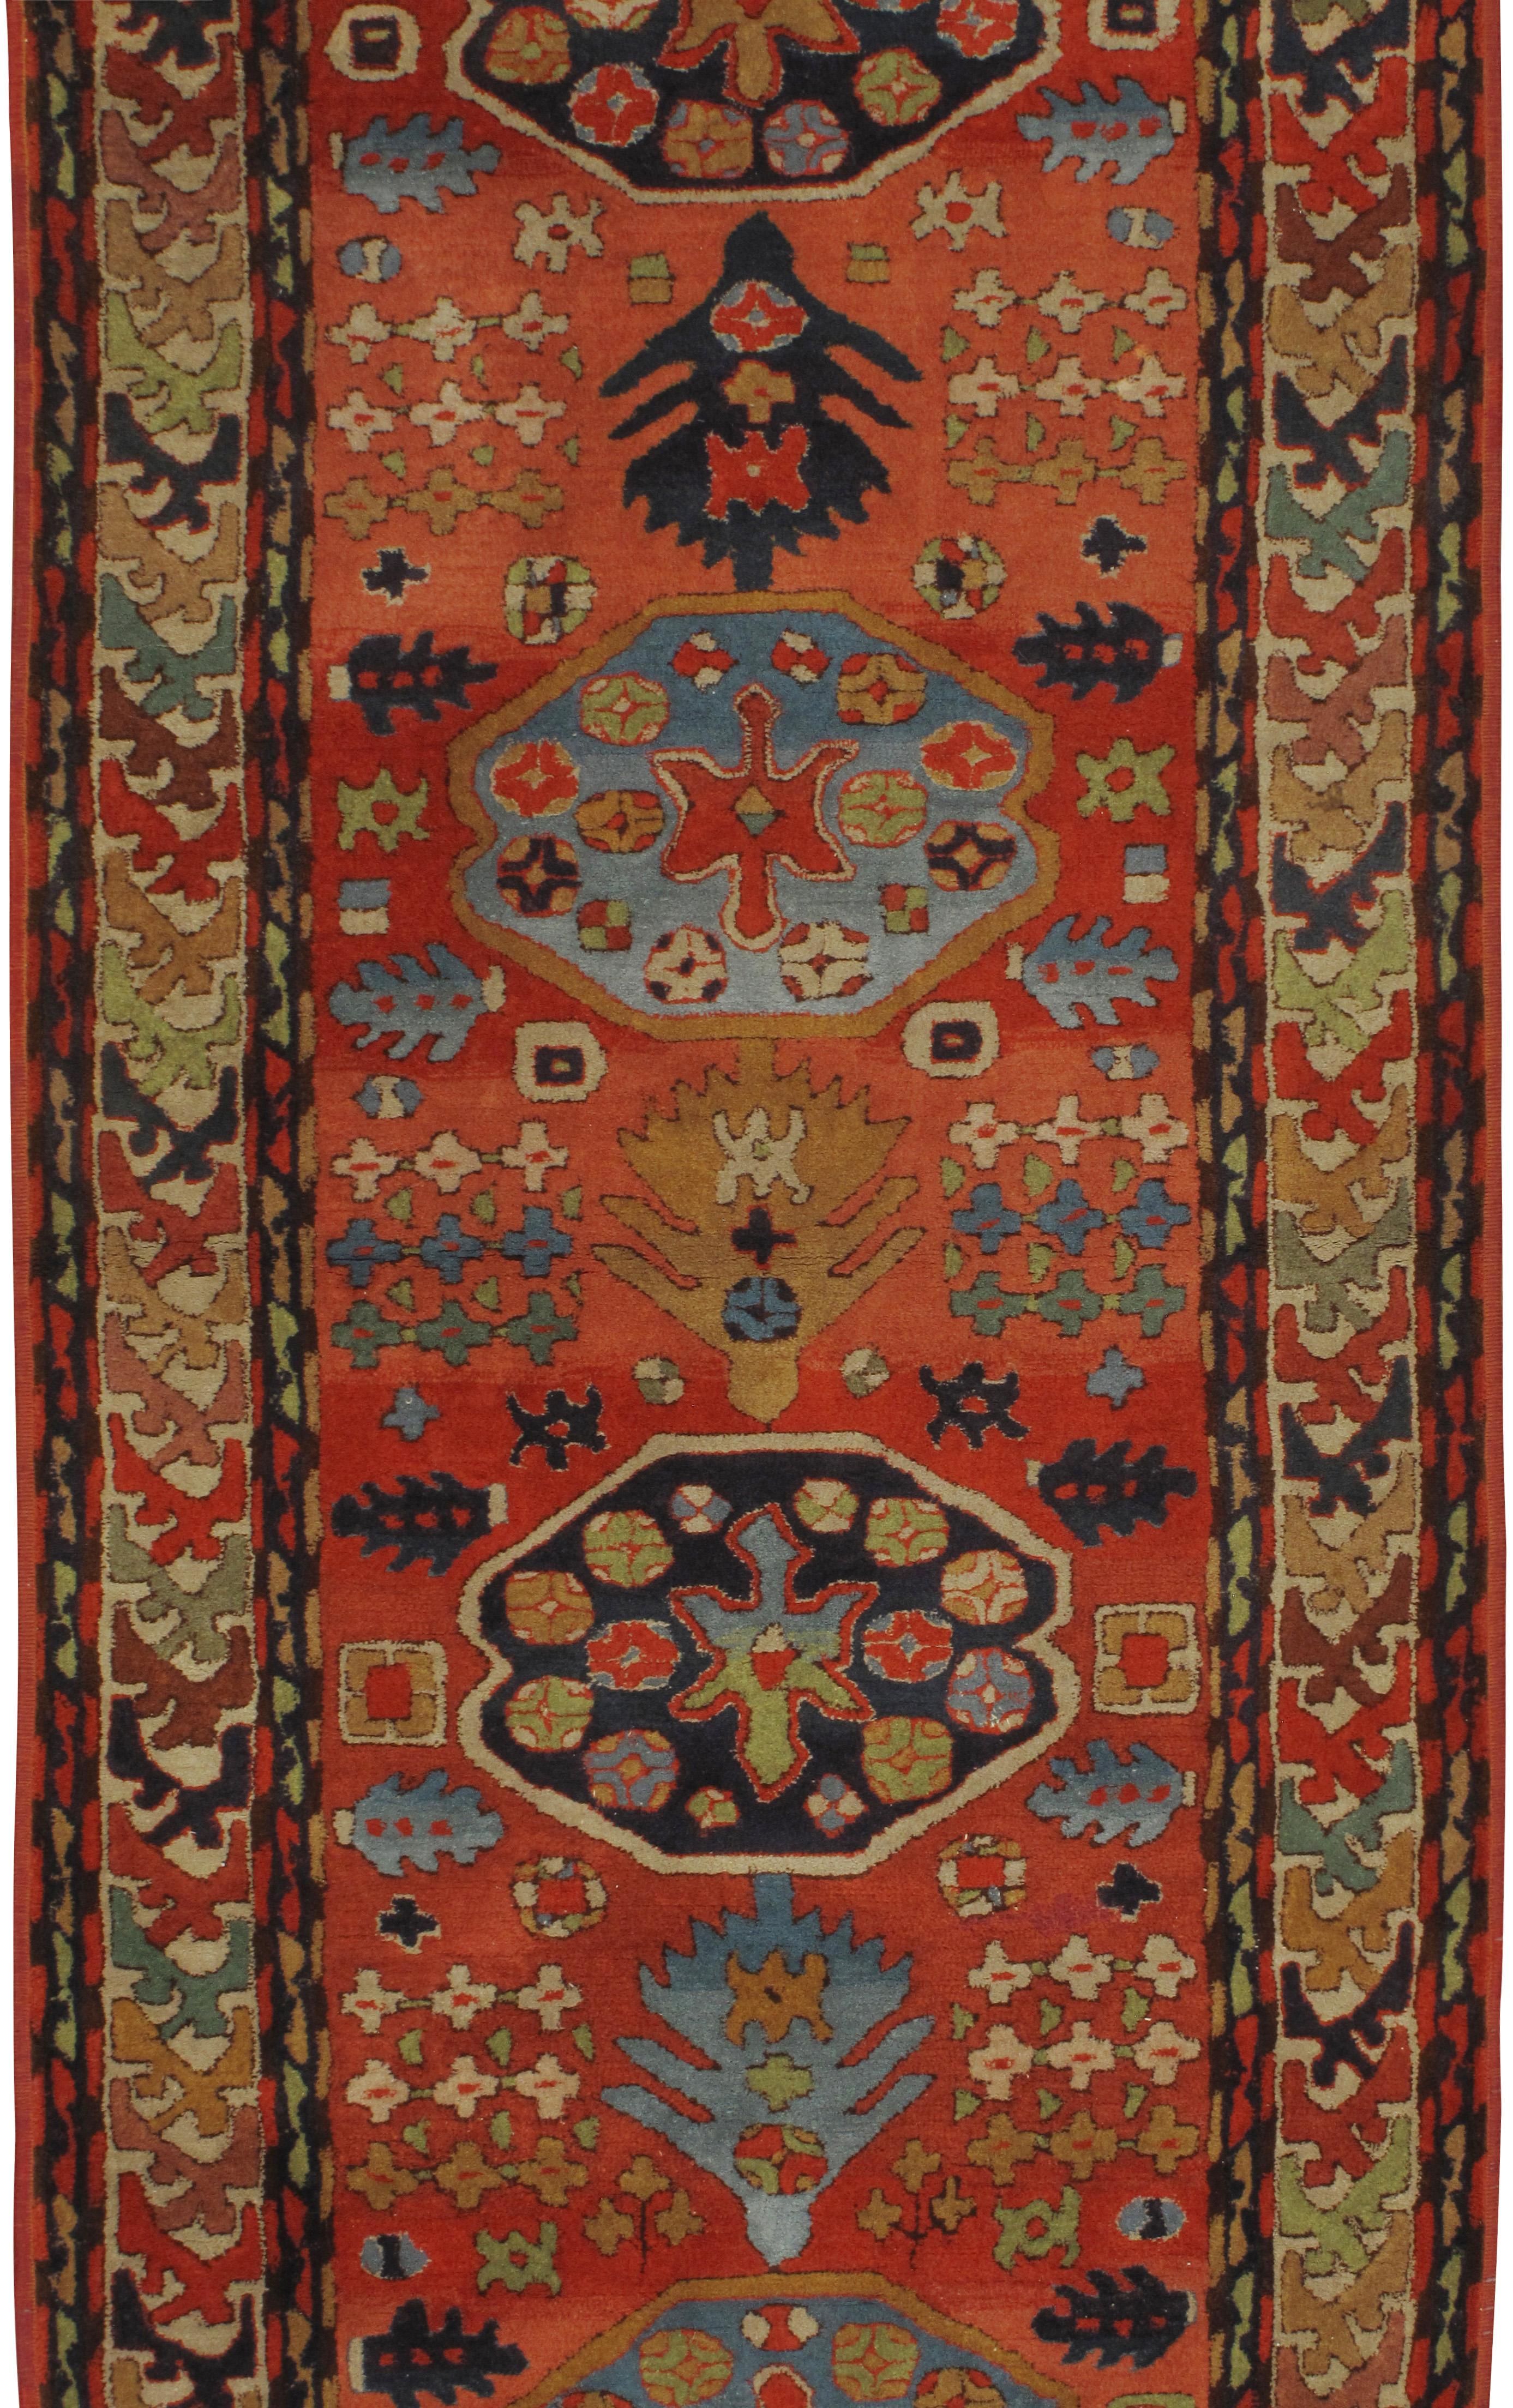 Antique German hooked runner rug, circa 1900. An antique German hooked rug with a traditional Indian Agra design in a soft watermelon color with blues and greens. This is a rare example of hooked rugs from Germany. Size: 3'1 x 12'2.